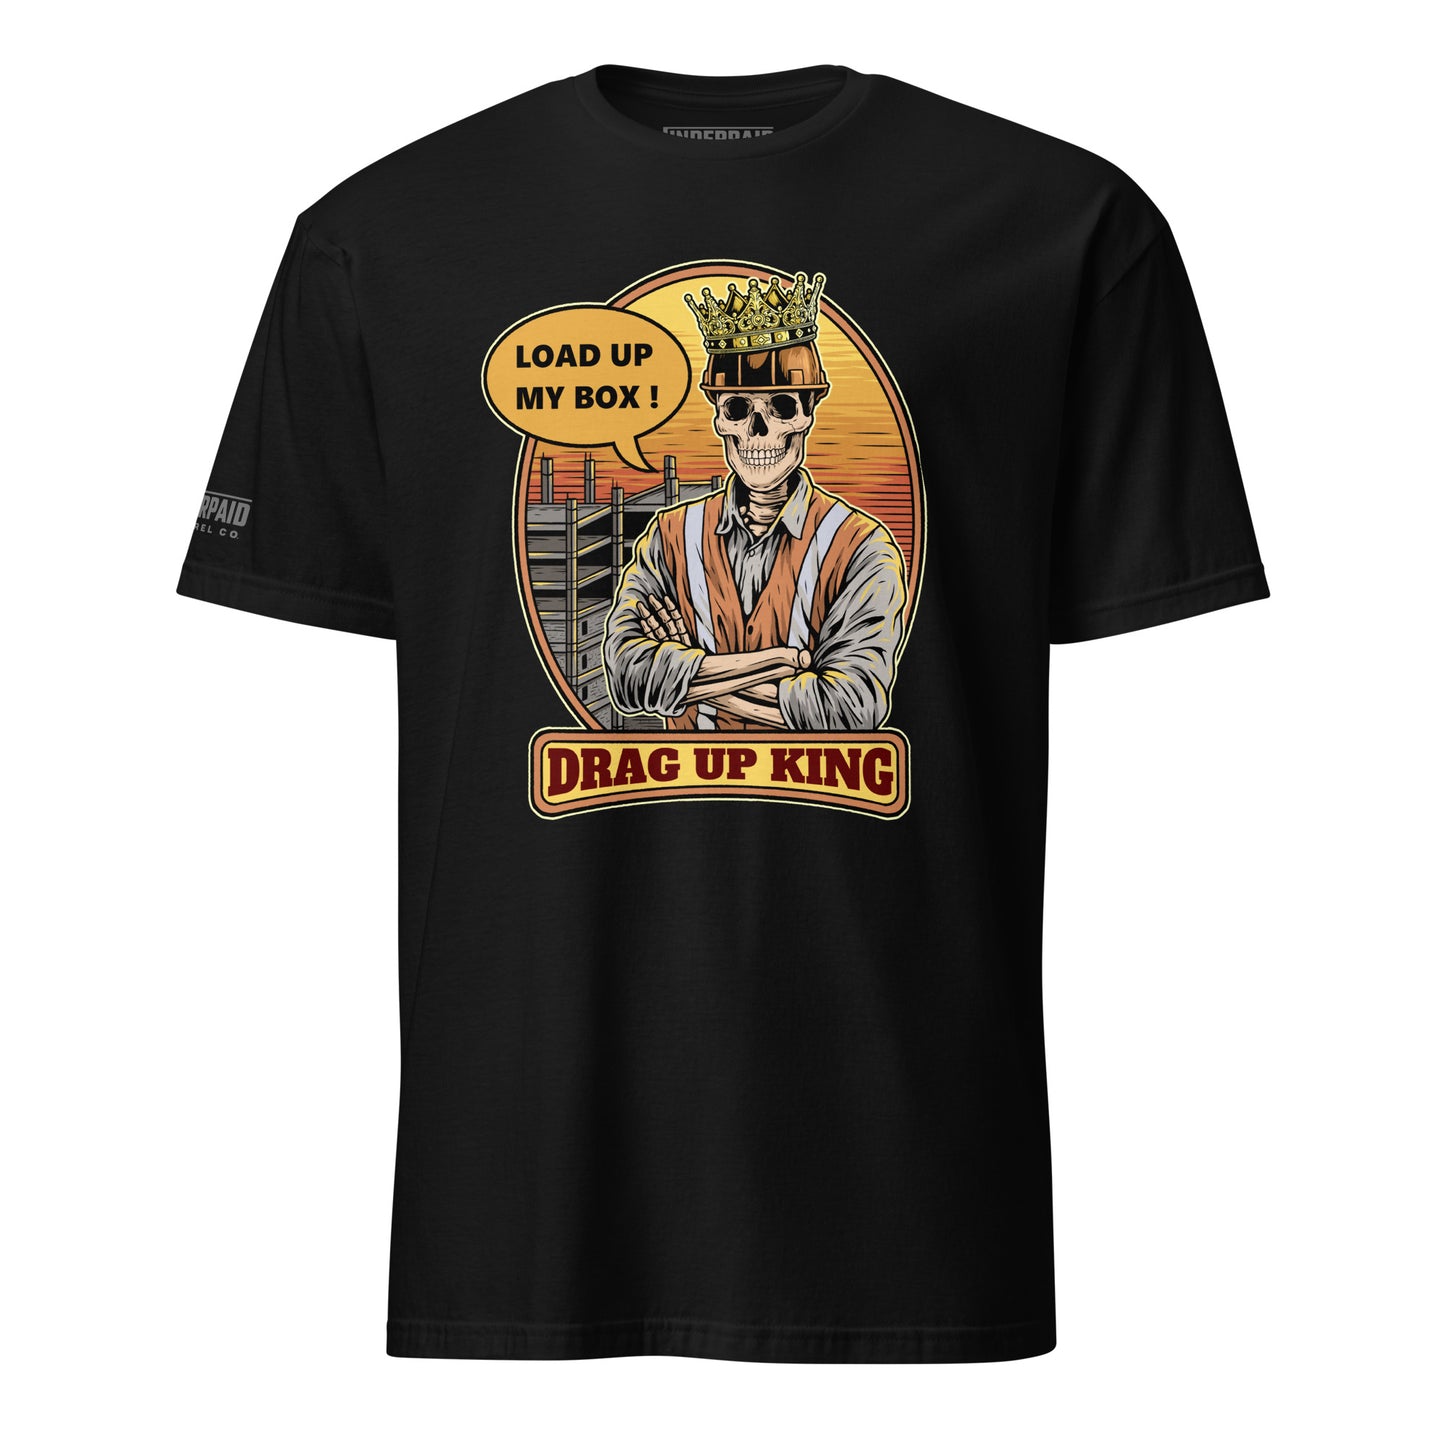 Drag Up King graphic tee featuring full color design